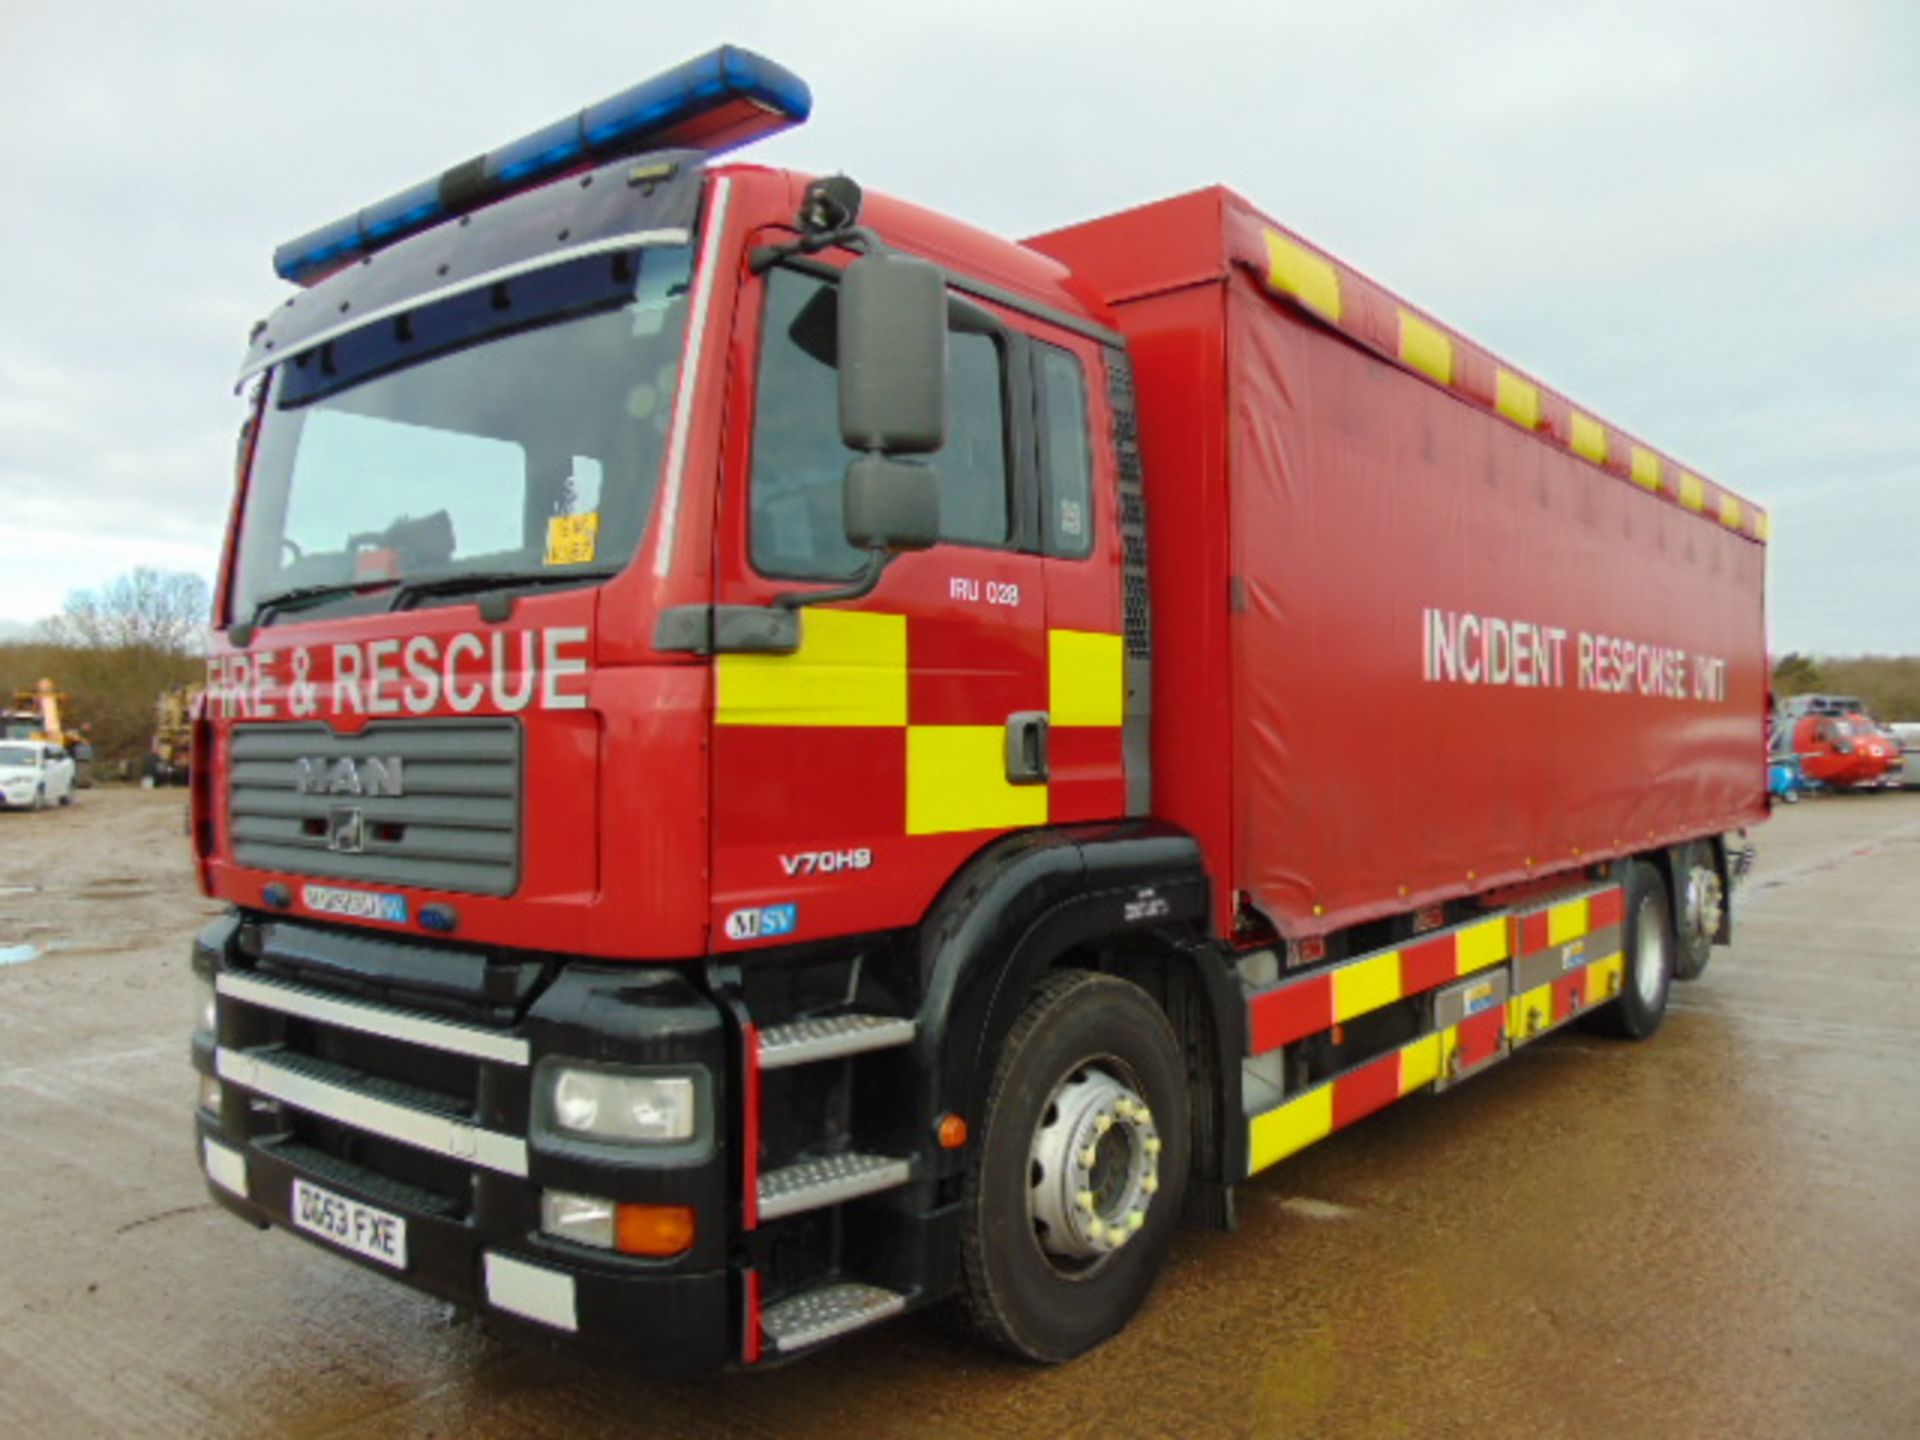 2004 MAN TG-A 6x2 Incident Support Unit - Image 3 of 26